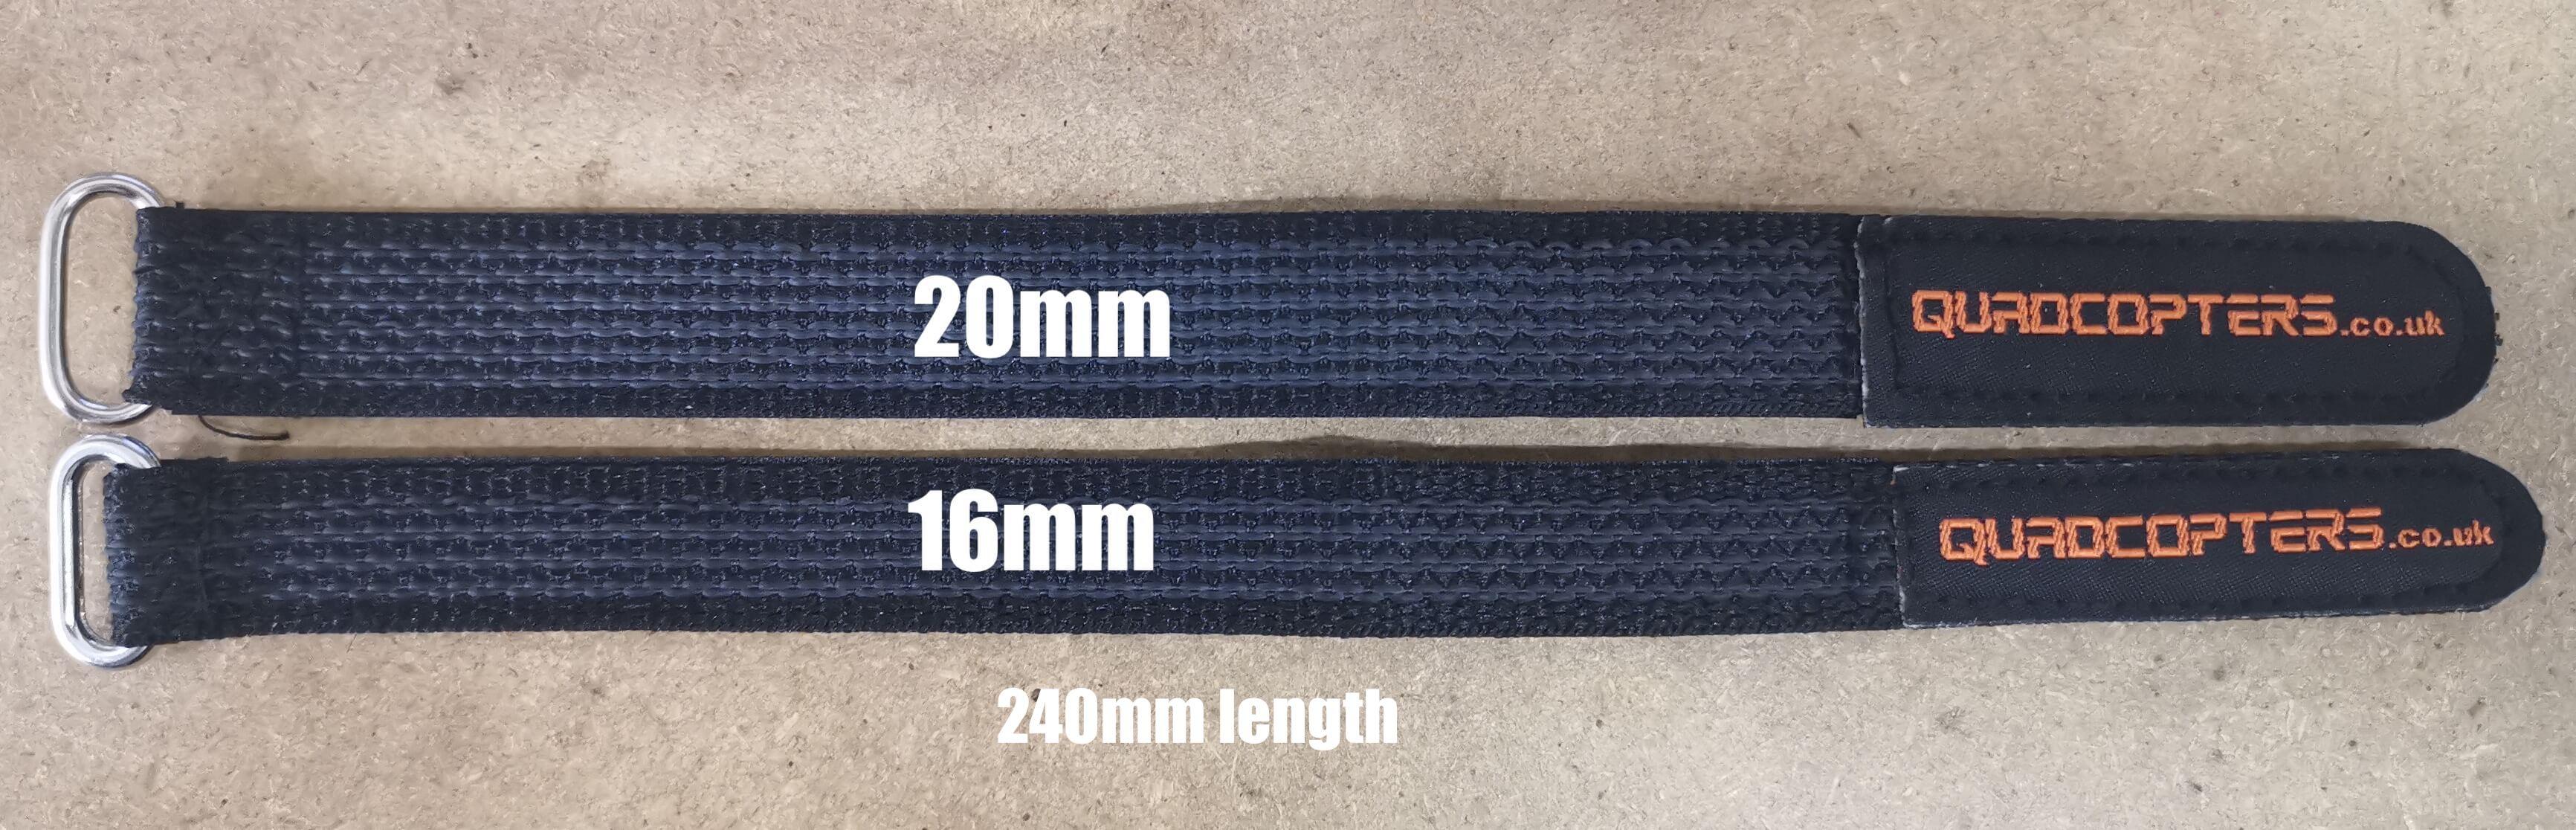 Lipo Strap for drone racing 240mm